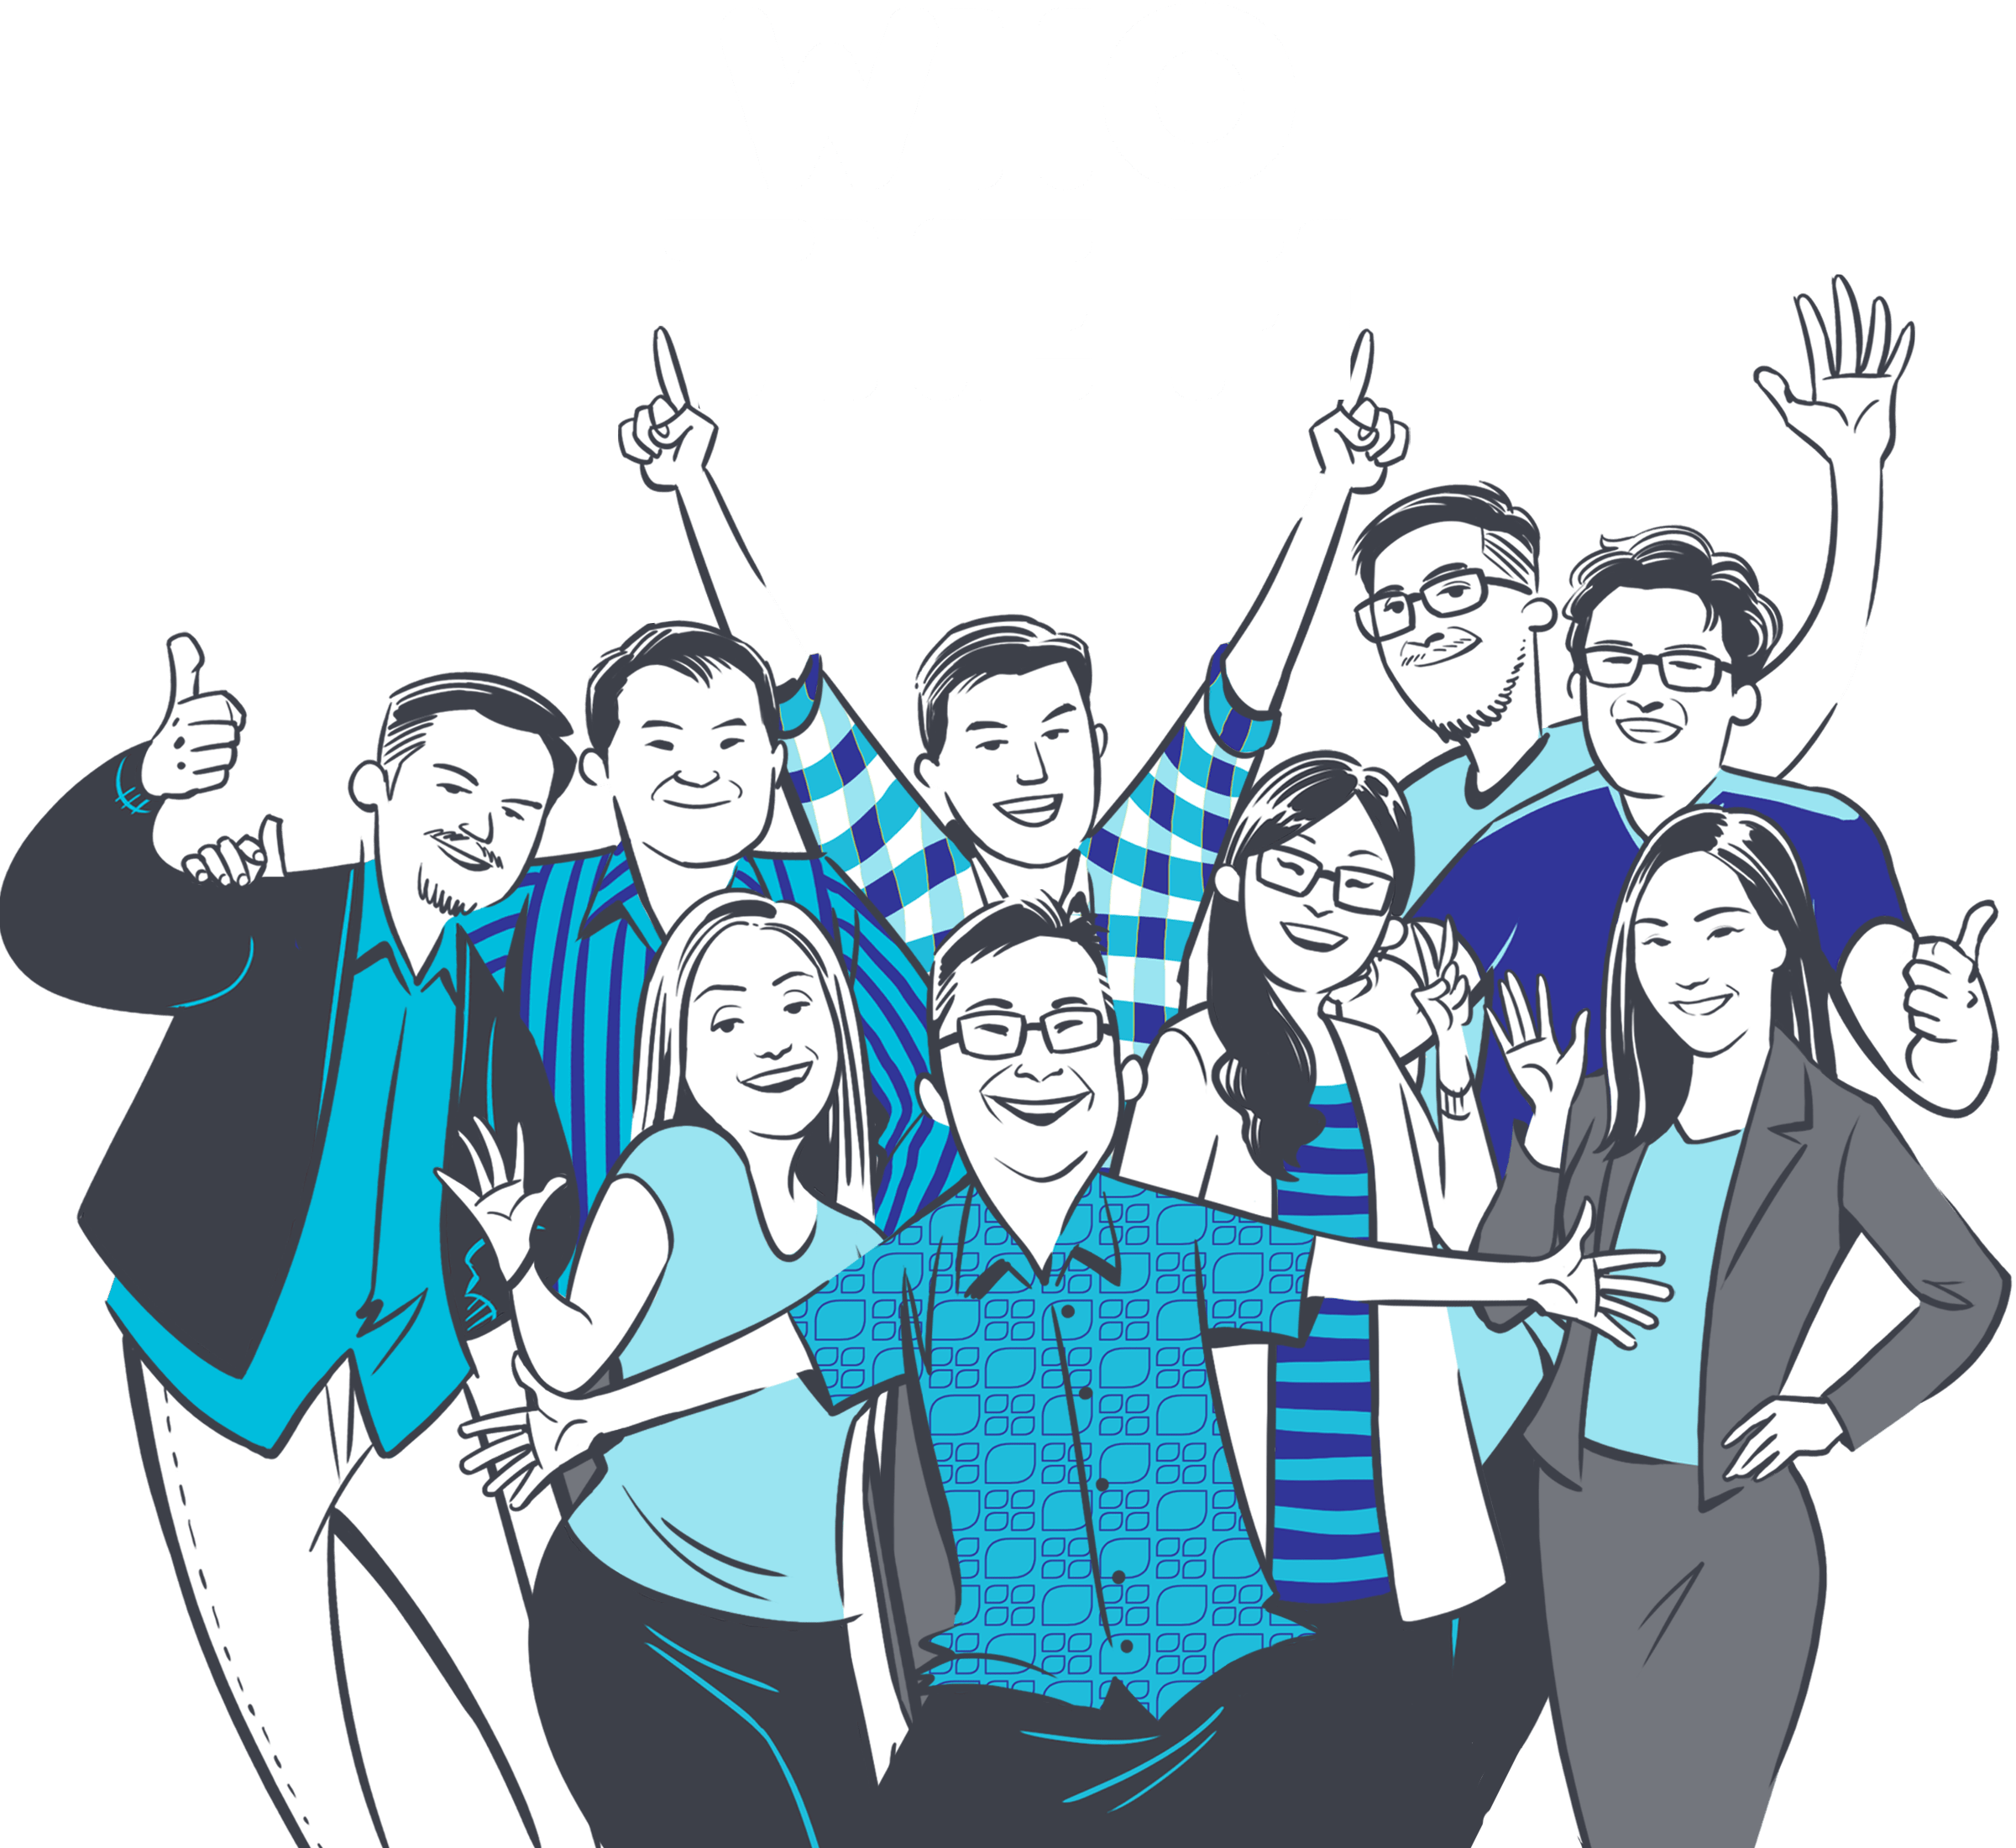 Who The Fi?